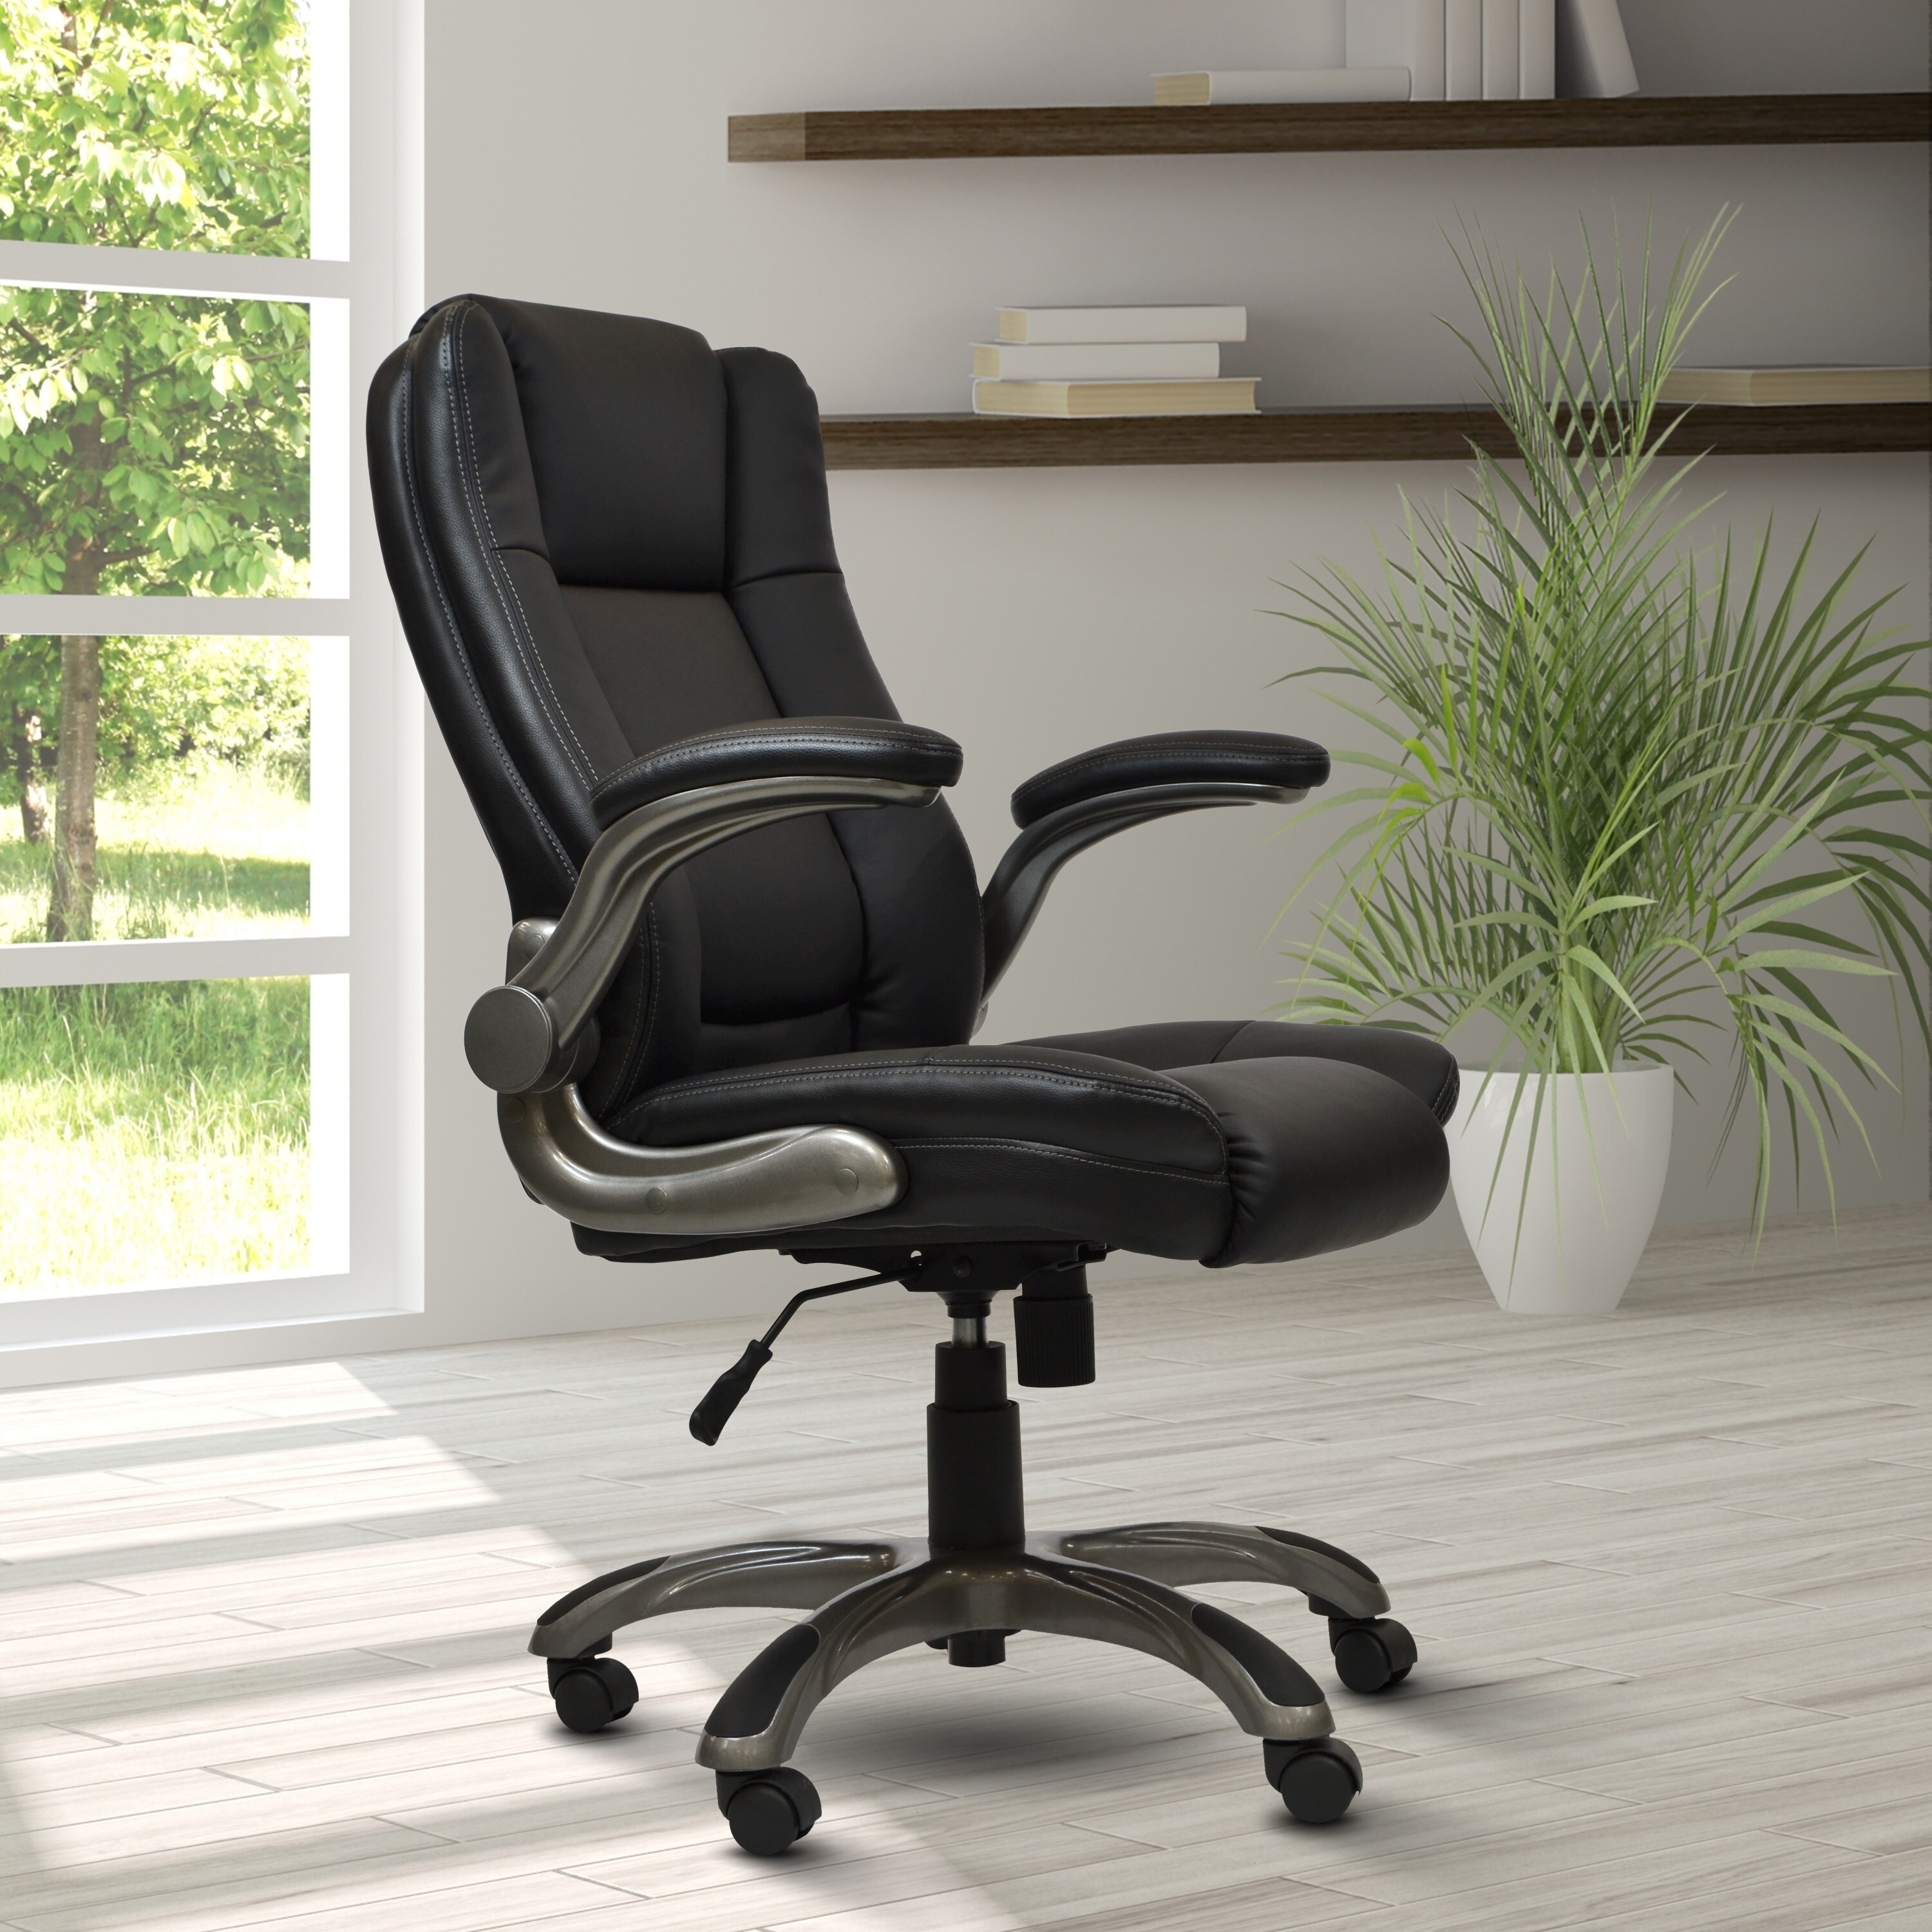 https://ak1.ostkcdn.com/images/products/is/images/direct/e1a47e88a24b897e6ea06cb13f533b1ab4735d31/Techni-Mobili-Medium-Back-Executive-Office-Chair-with-Flip-up-Arms%2C-Black.jpg